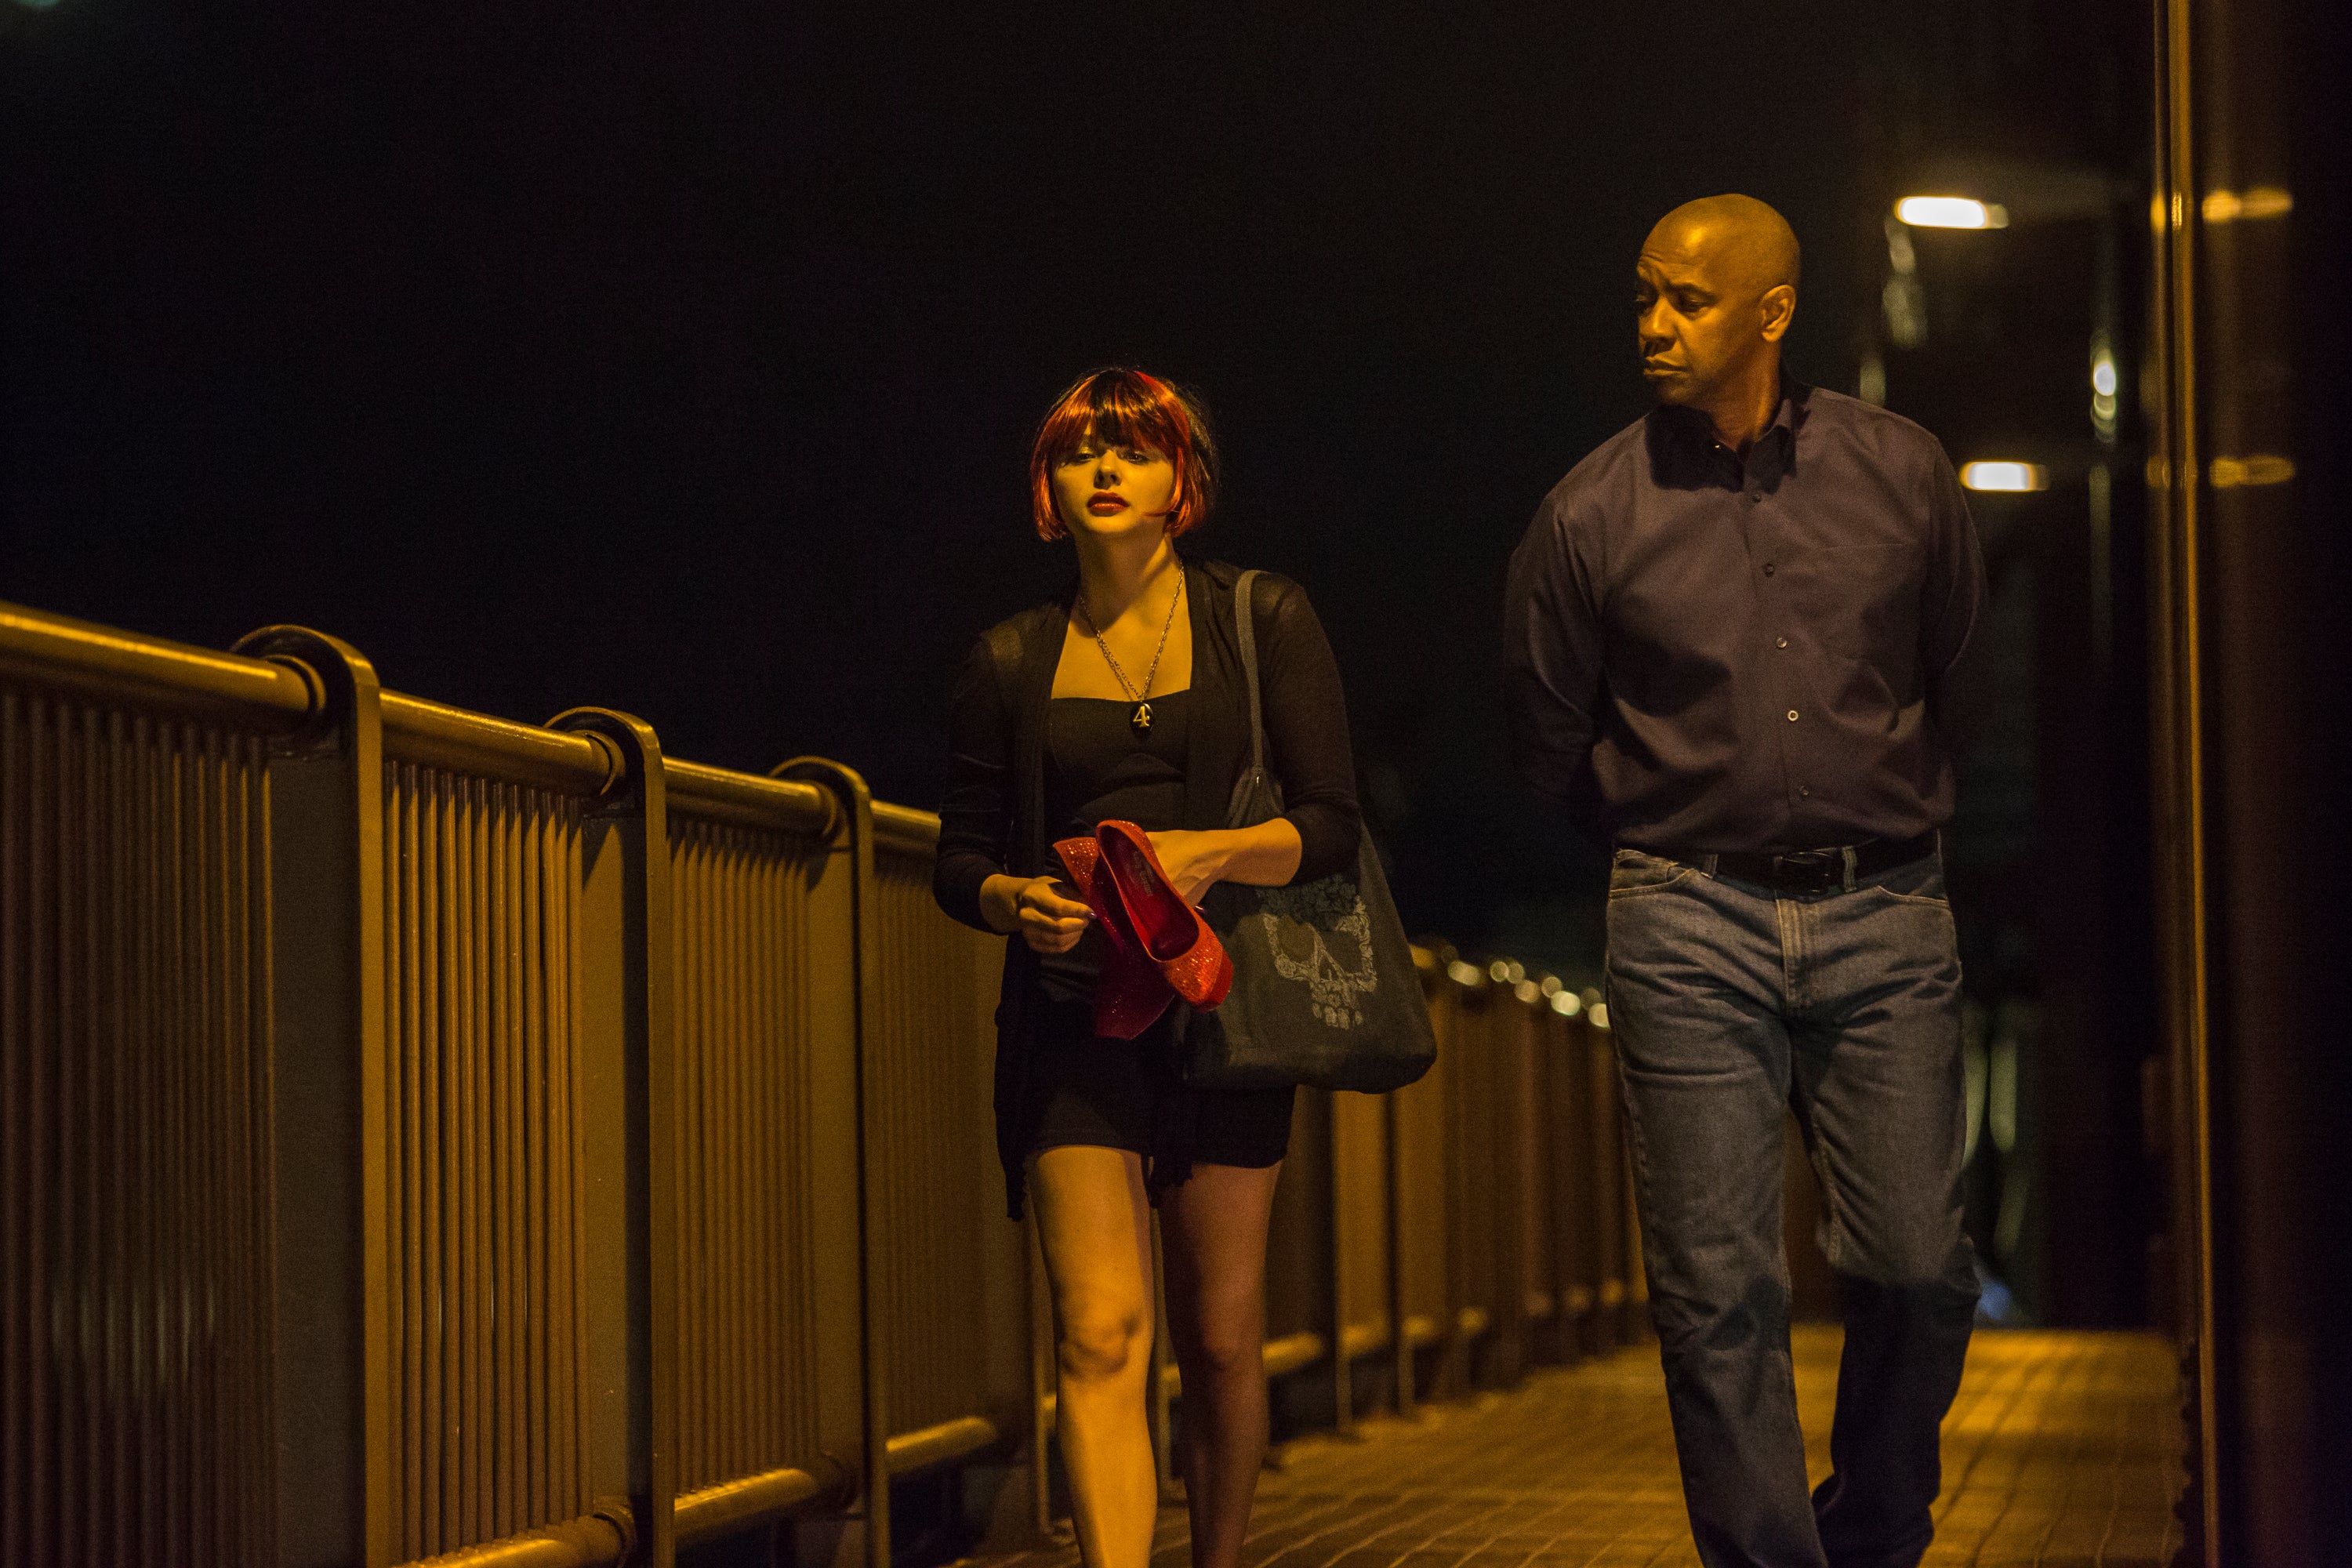 Teri (Chloe Grace Moretz) and McCall (Denzel Washington) walk across the bridge in Boston in Columbia Pictures' The Equalizer